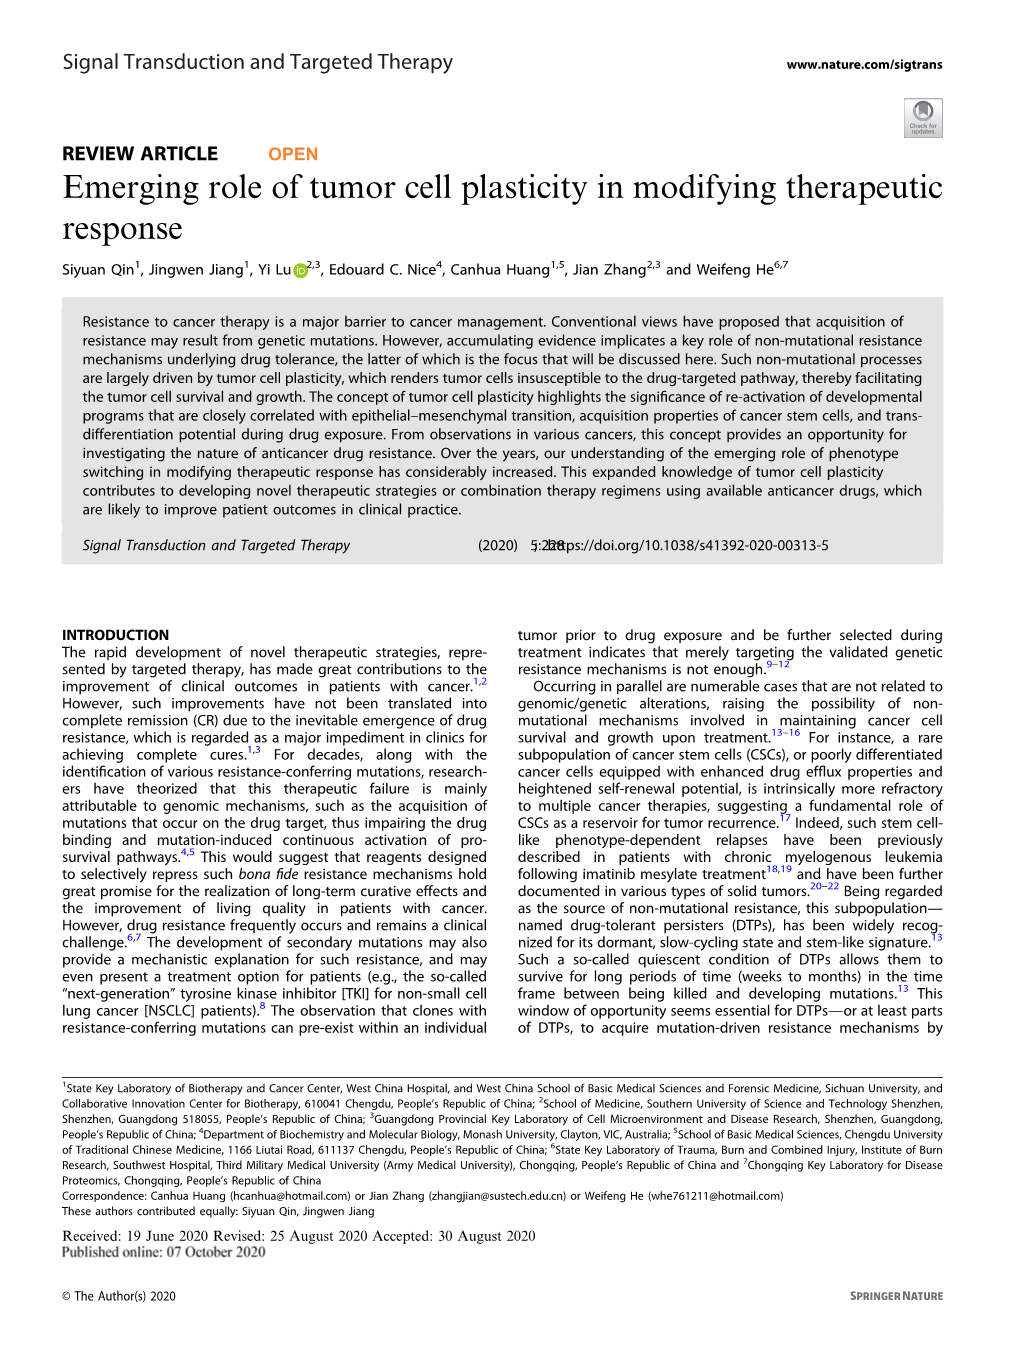 Emerging Role of Tumor Cell Plasticity in Modifying Therapeutic Response